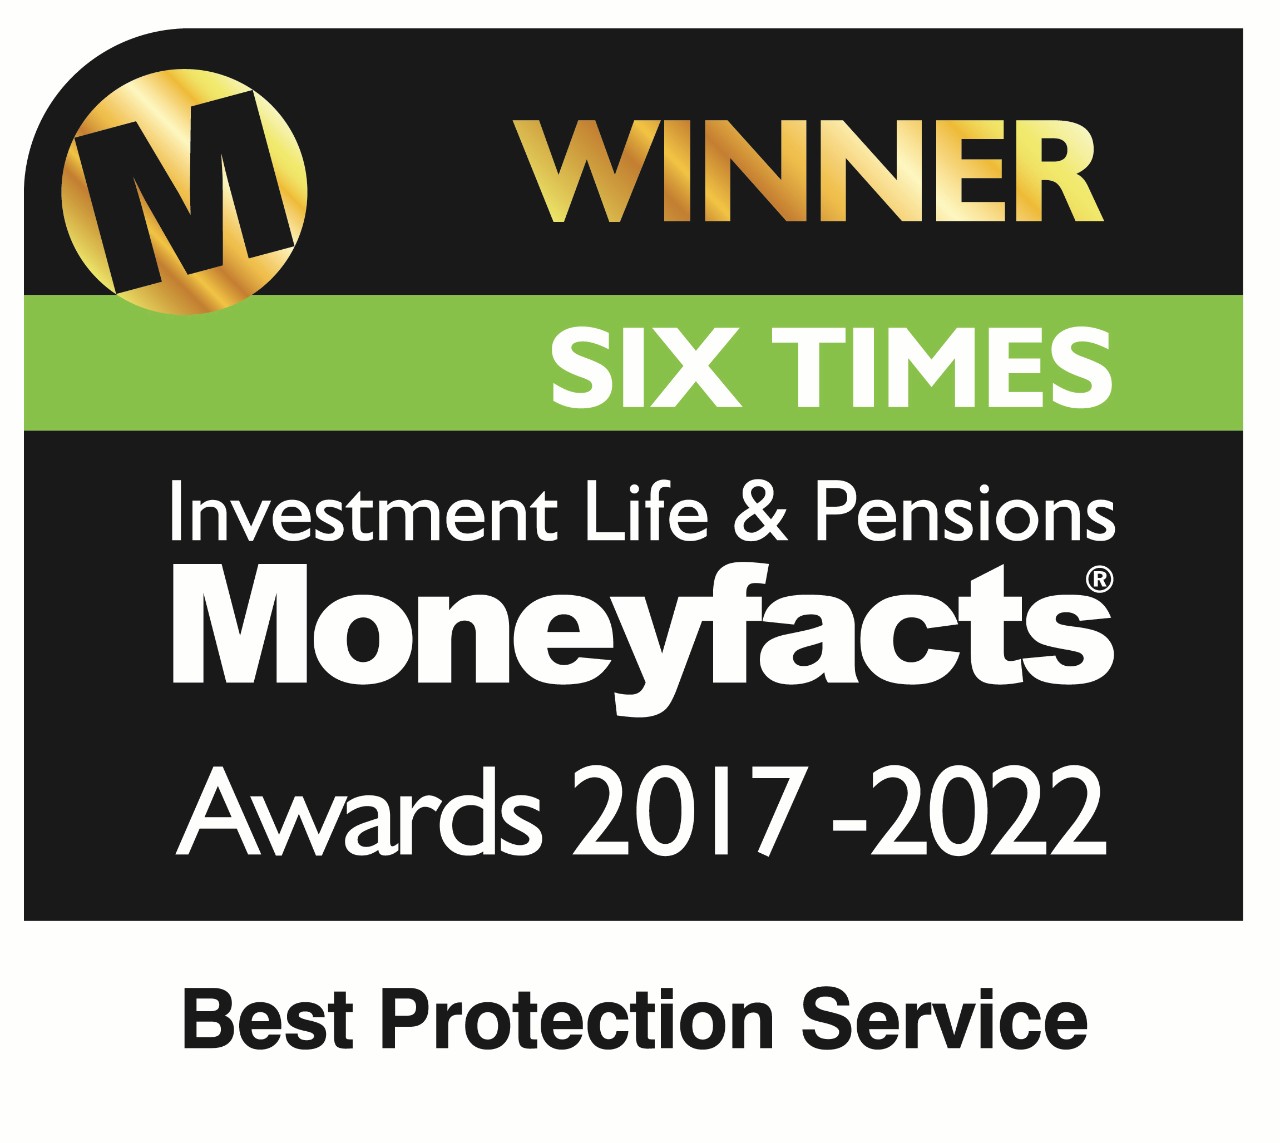 Six times winner of Best Protection Service at the Investment Life & Pensions Moneyfacts awards 2017-2022